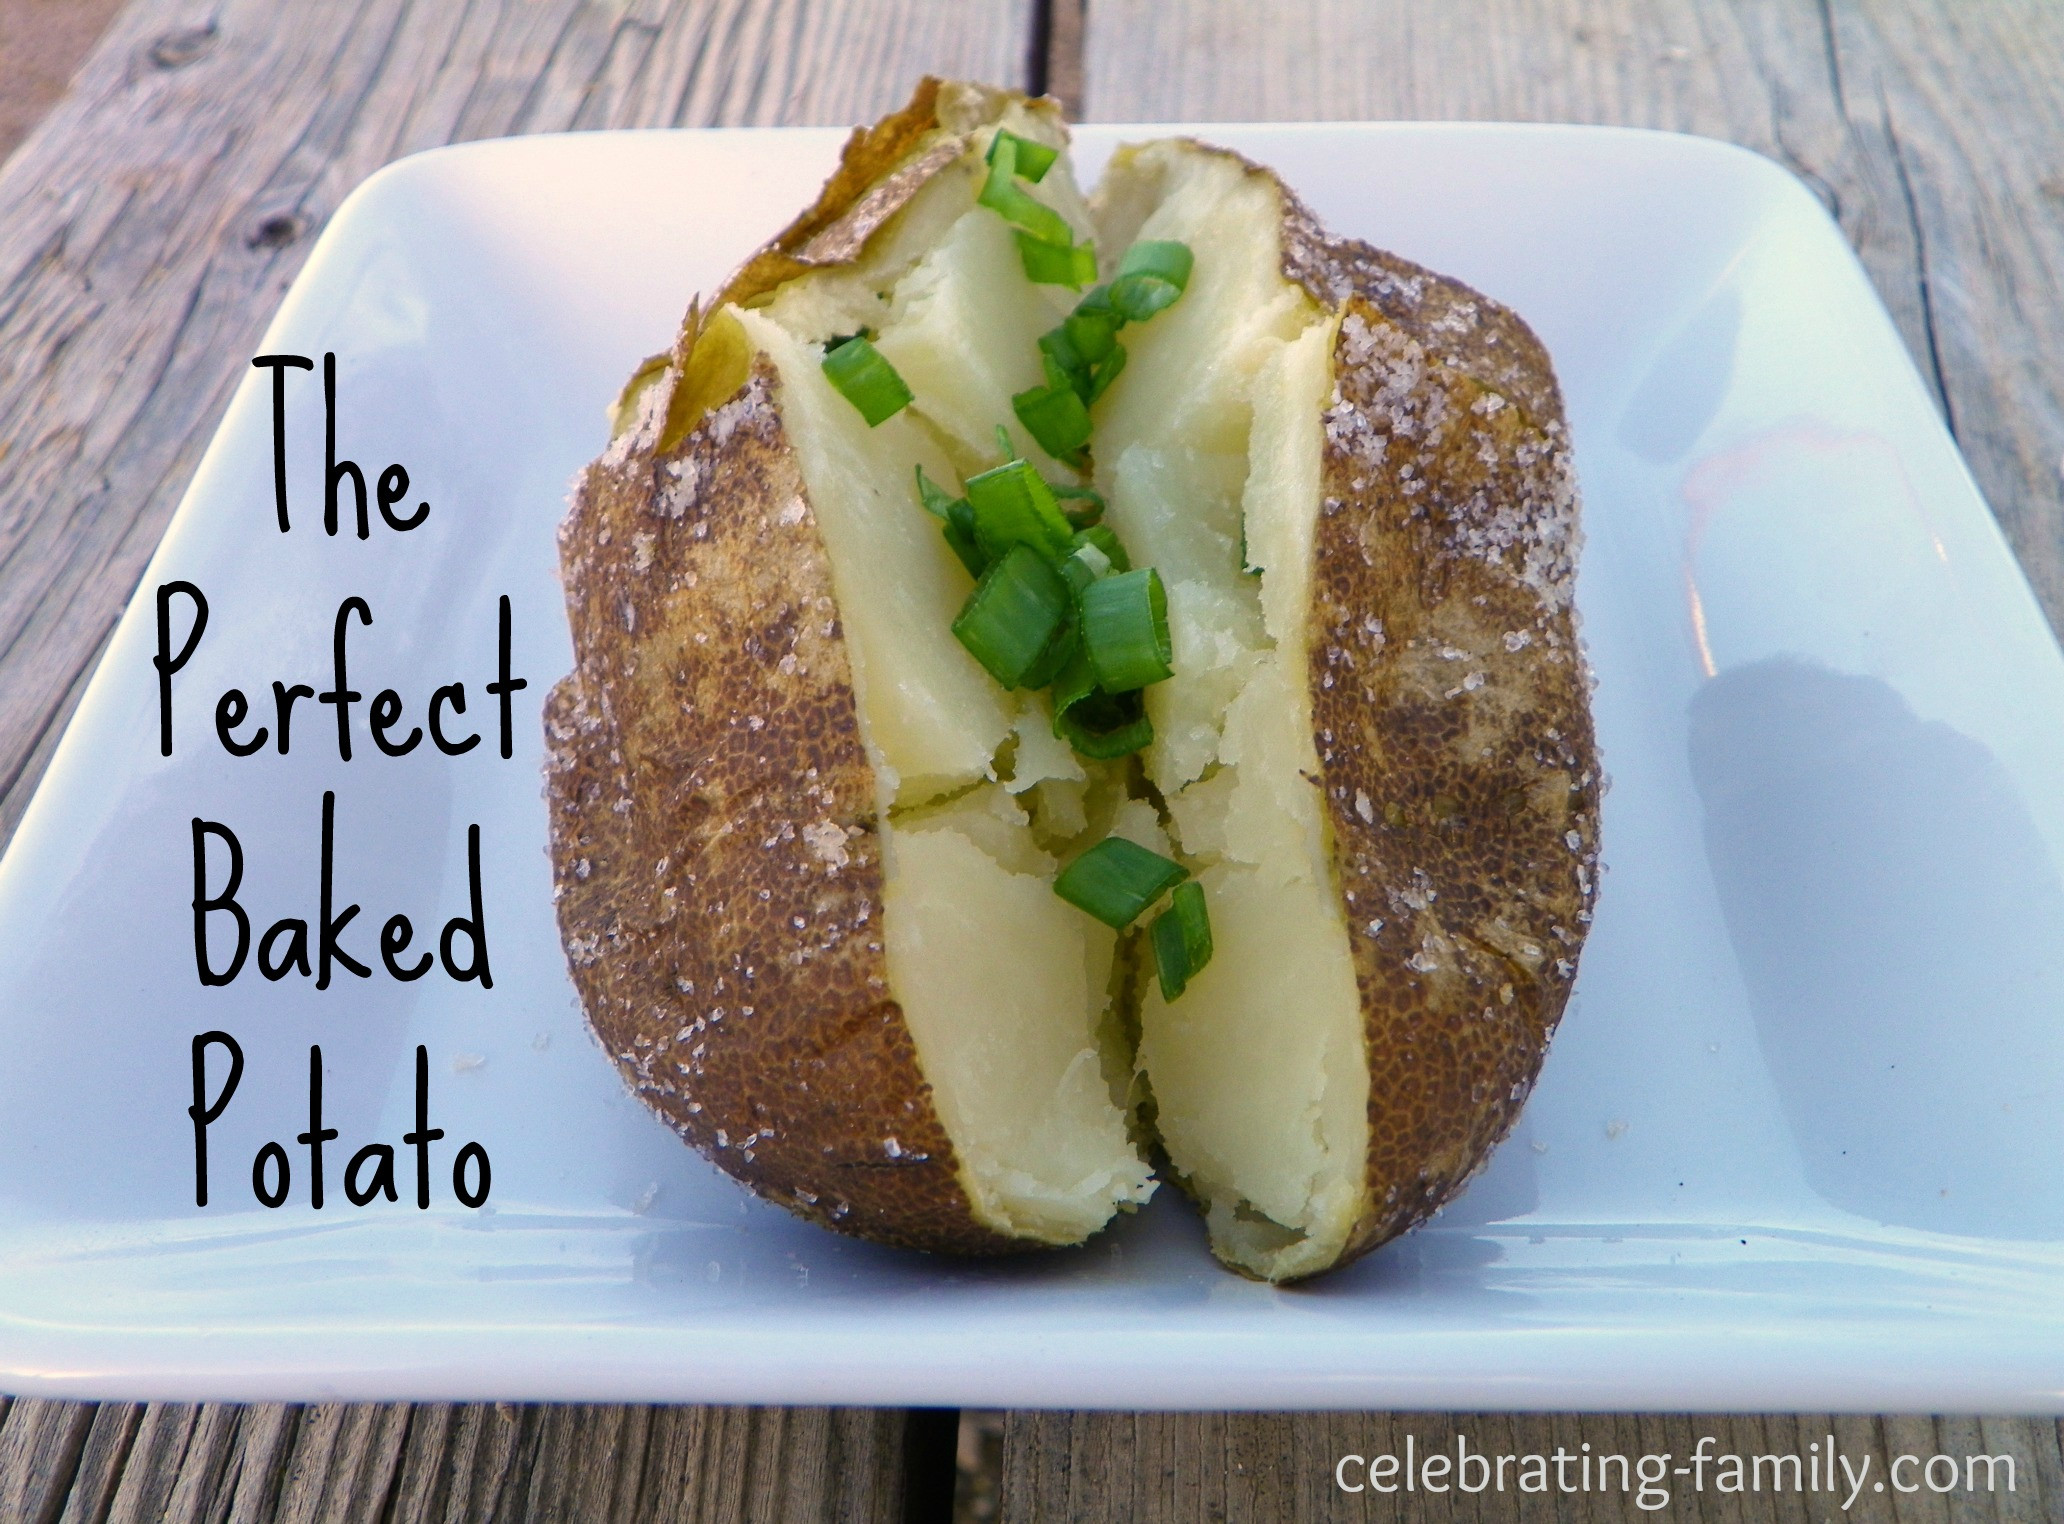 How To Make A Baked Potato
 How to Make the Perfect Baked Potato